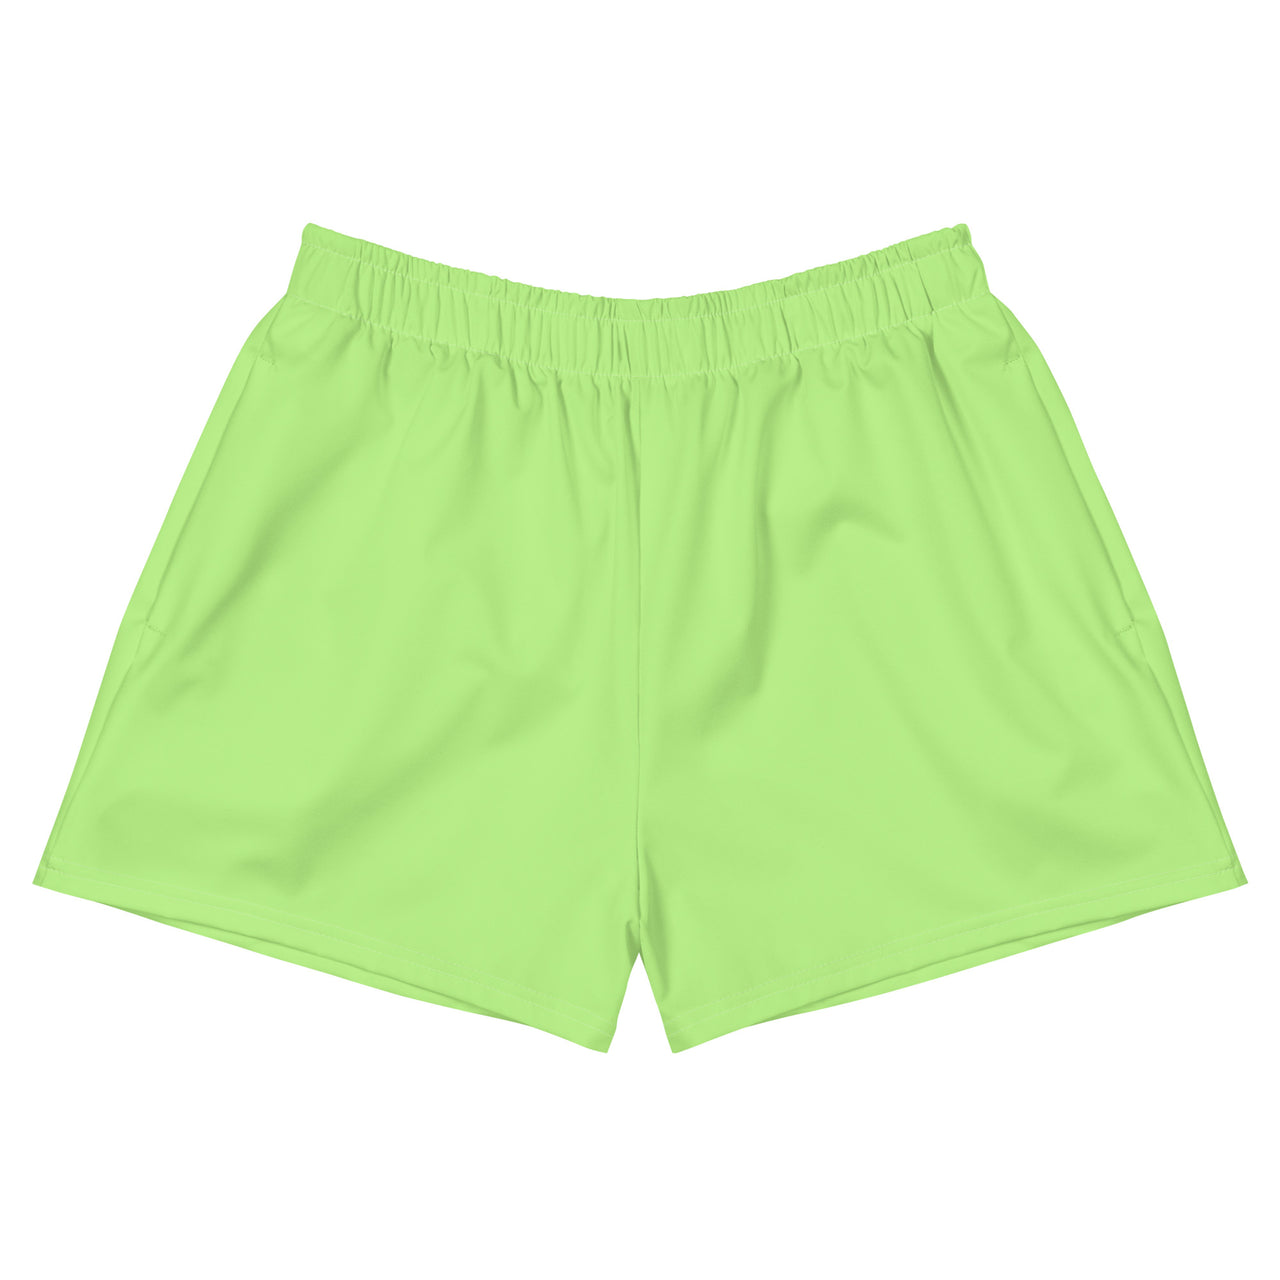 Women’s Recycled Solid Athletic Shorts - Tea SHAVA CO